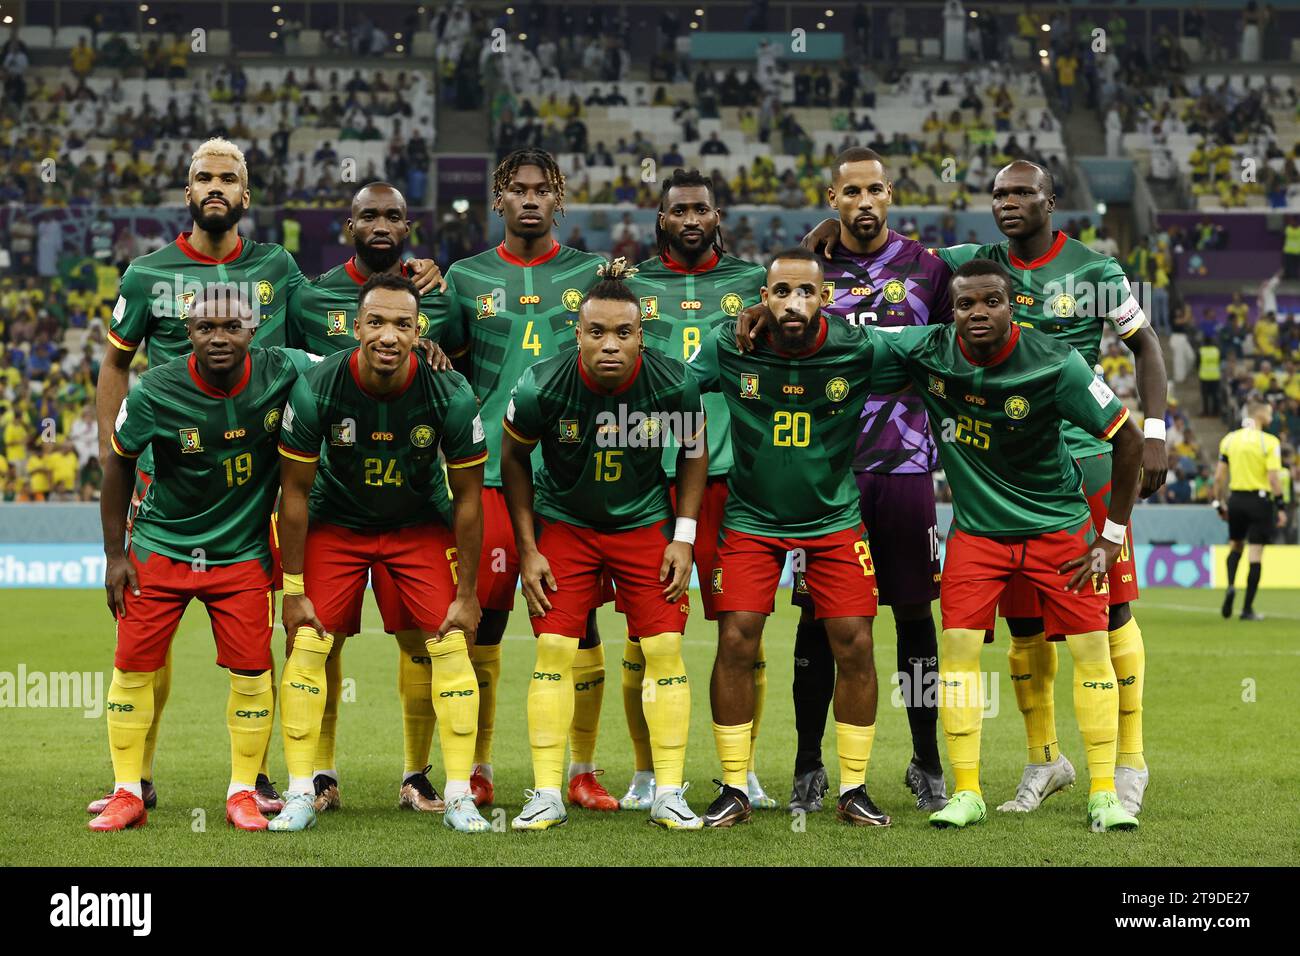 LUSAIL CITY - (Top Row L-R) Eric Maxim Choupo-Moting of Cameroon, Nicolas Ngamaleu of Cameroon, Andre-Frank Zambo Anguissa of Cameroon, Cameroon goalkeeper Devis Epassy, Vincent,Christopher Wooh of Cameroon(Front row L-R) Collins Fai of Cameroon, Enzo Ebosse of Cameroon, Pierre Kunde of Cameroon, Bryan Mbeumo of Cameroon, Nouhou Tolo of Cameroon, Vincent Aboubakar of Cameroon during the FIFA World Cup Qatar 2022 group G match between Cameroon and Brazil at the Lusail Stadium on December 2, 2022 in Lusail City , Qatar. ANP | Hollandse Hoogte | MAURICE VAN STEEN Stock Photo